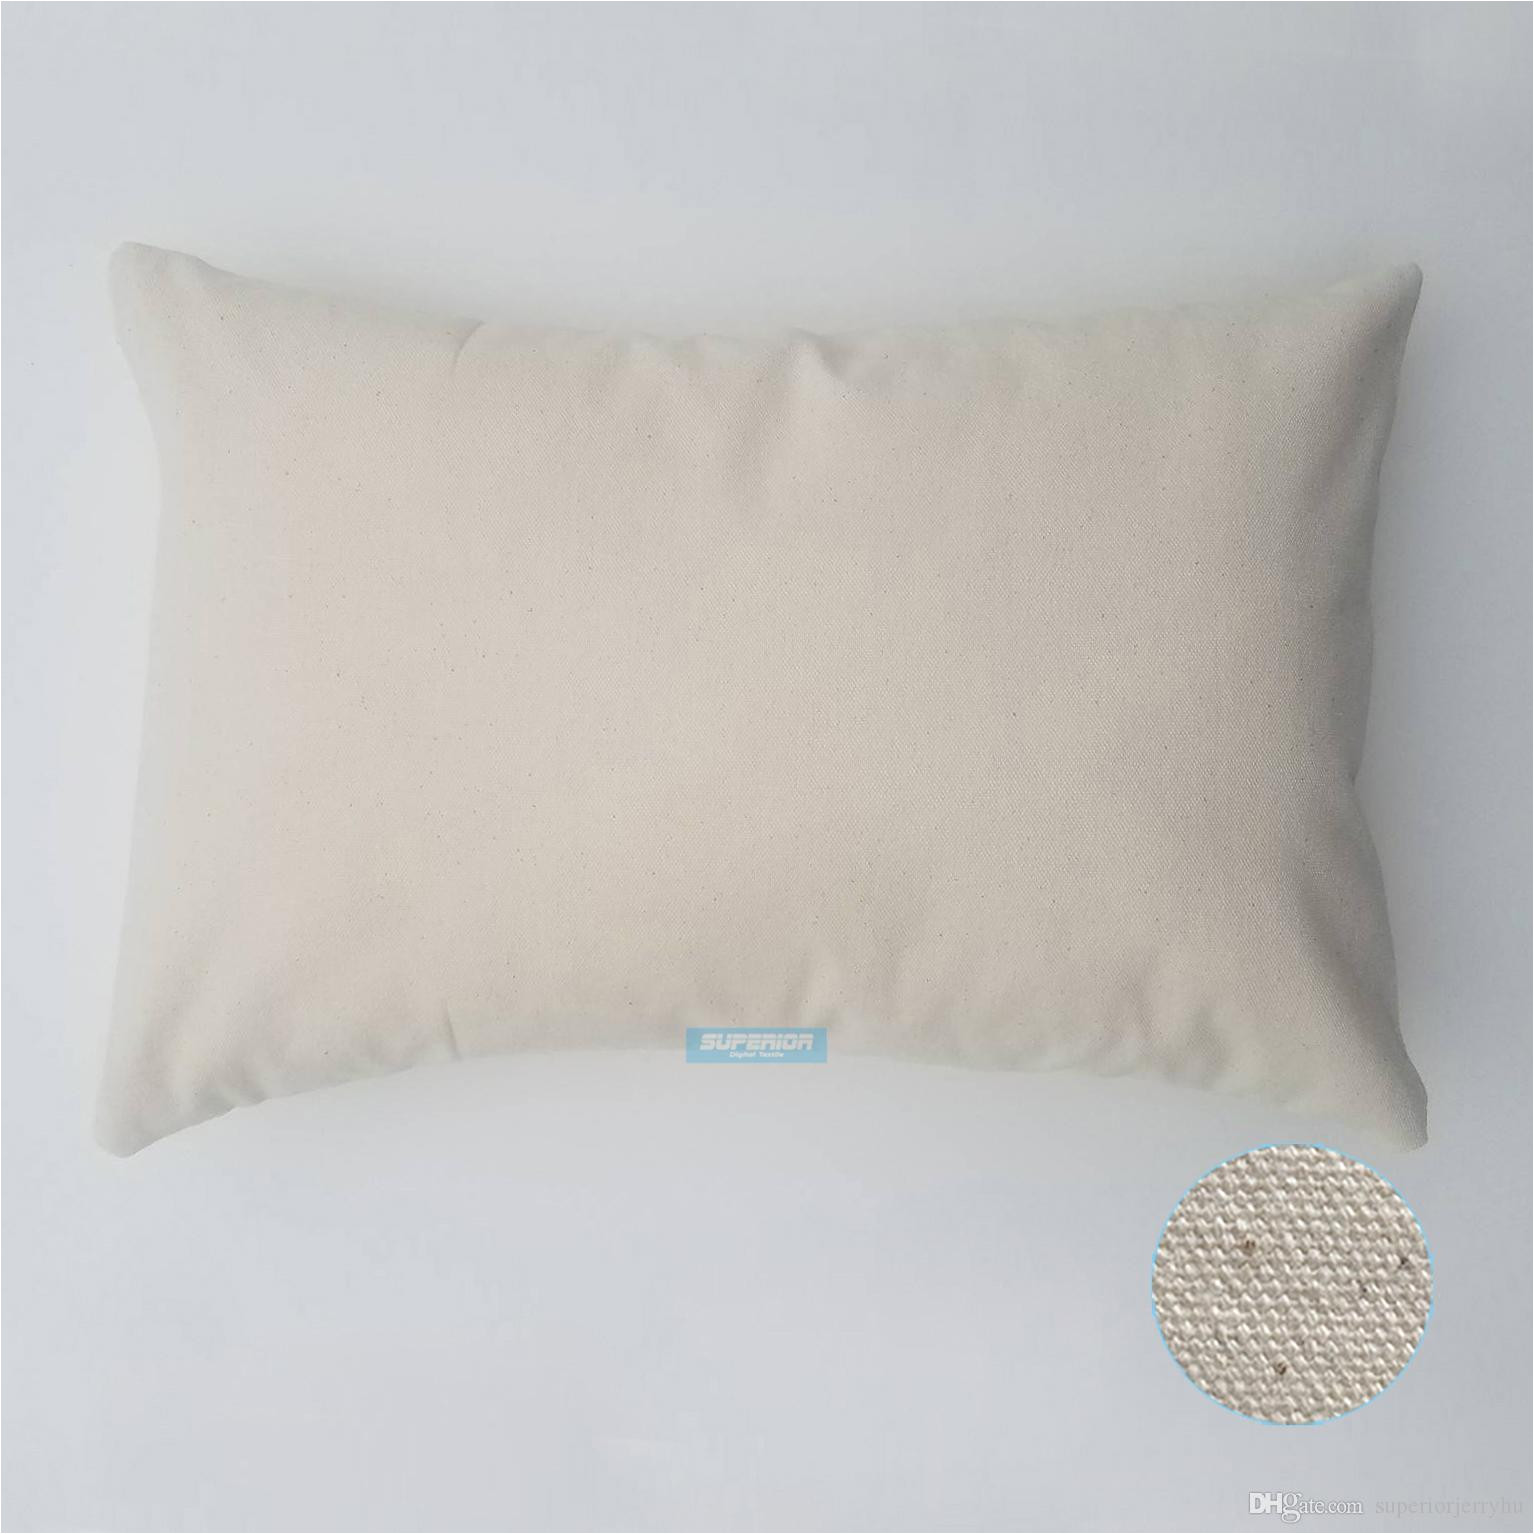 Blank Canvas Pillow Covers wholesale 12×18 Inches wholesale 8oz White or Natural Cotton Canvas Pillow